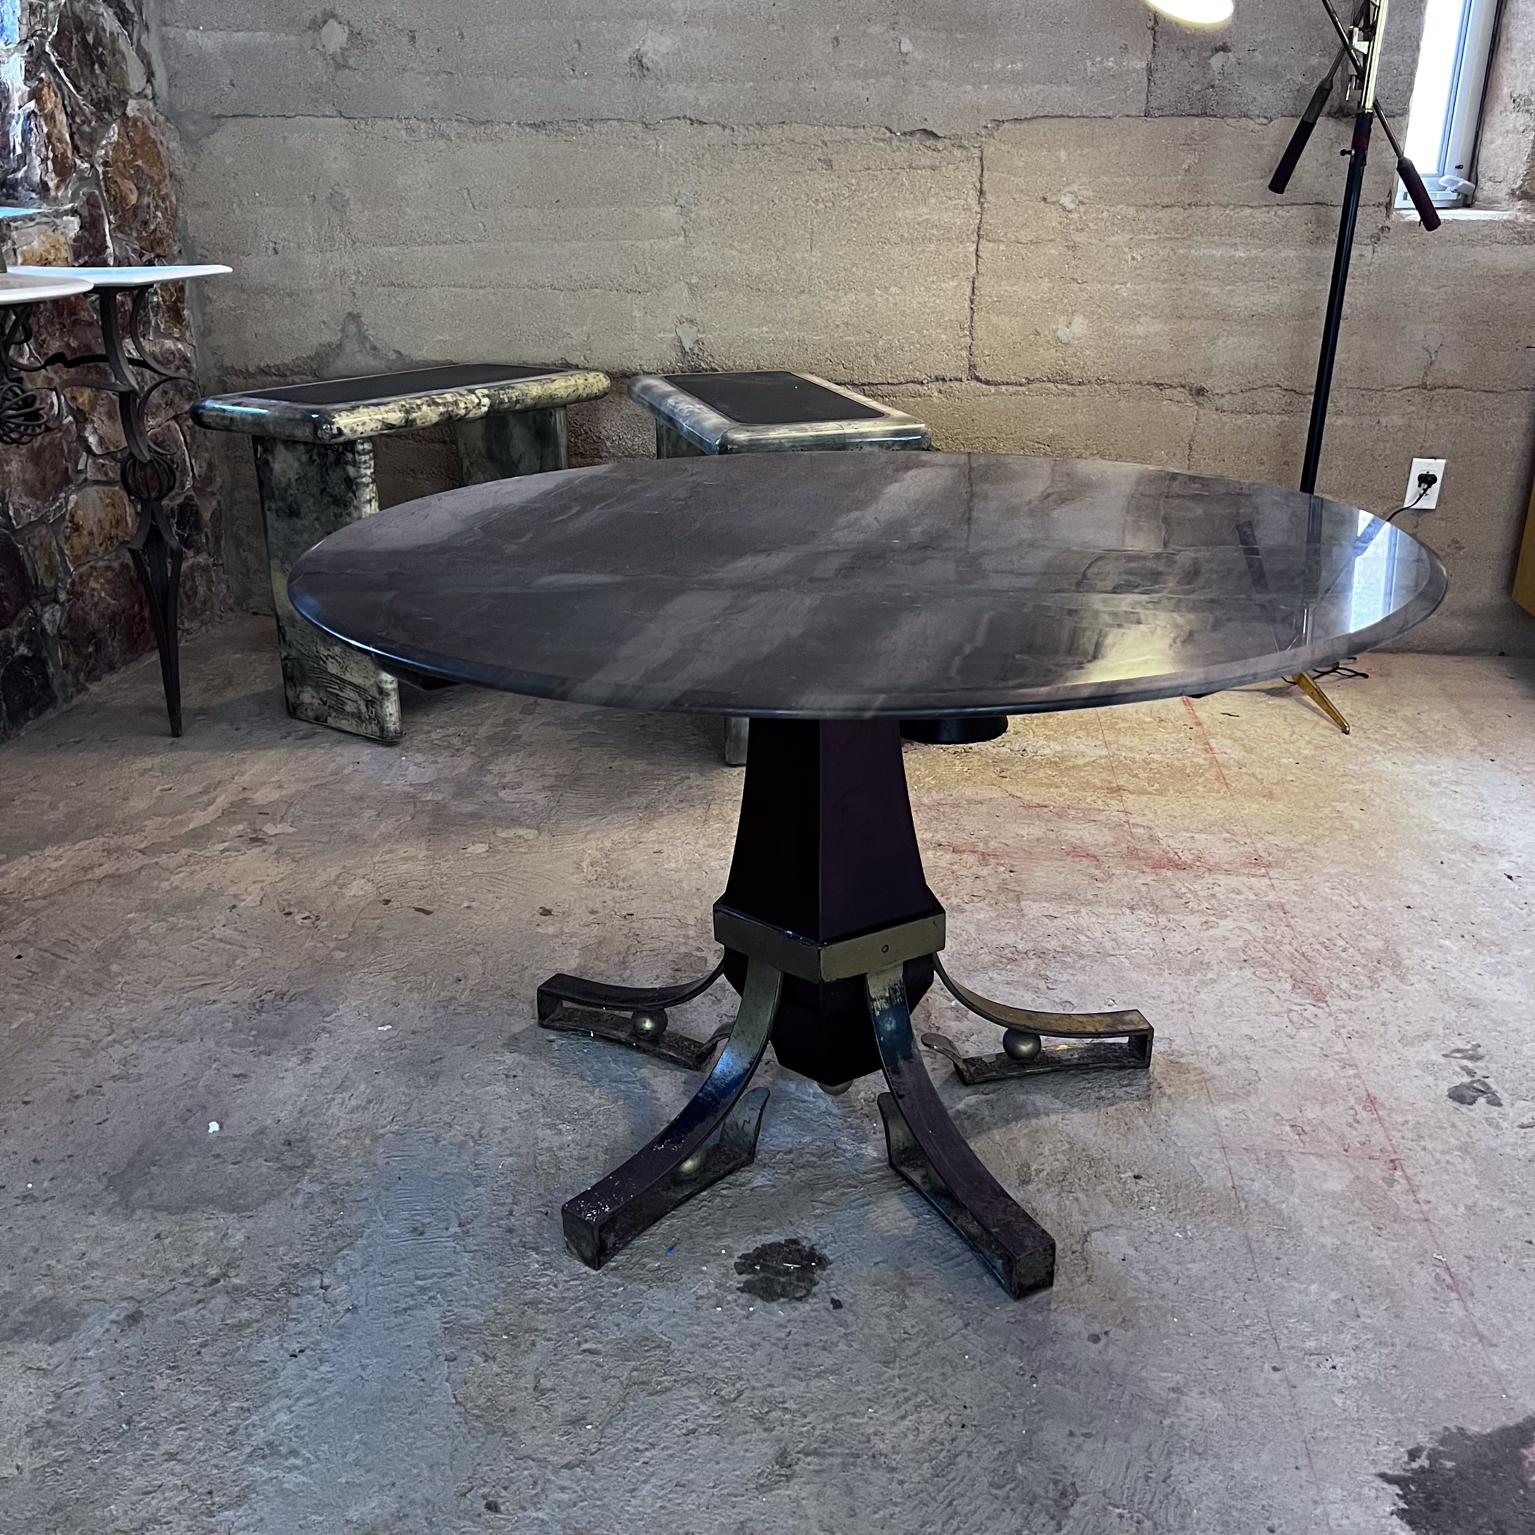 Mid-20th Century 1950s Arturo Pani Forged Iron Mahogany Marble Dining Table Mexico City For Sale